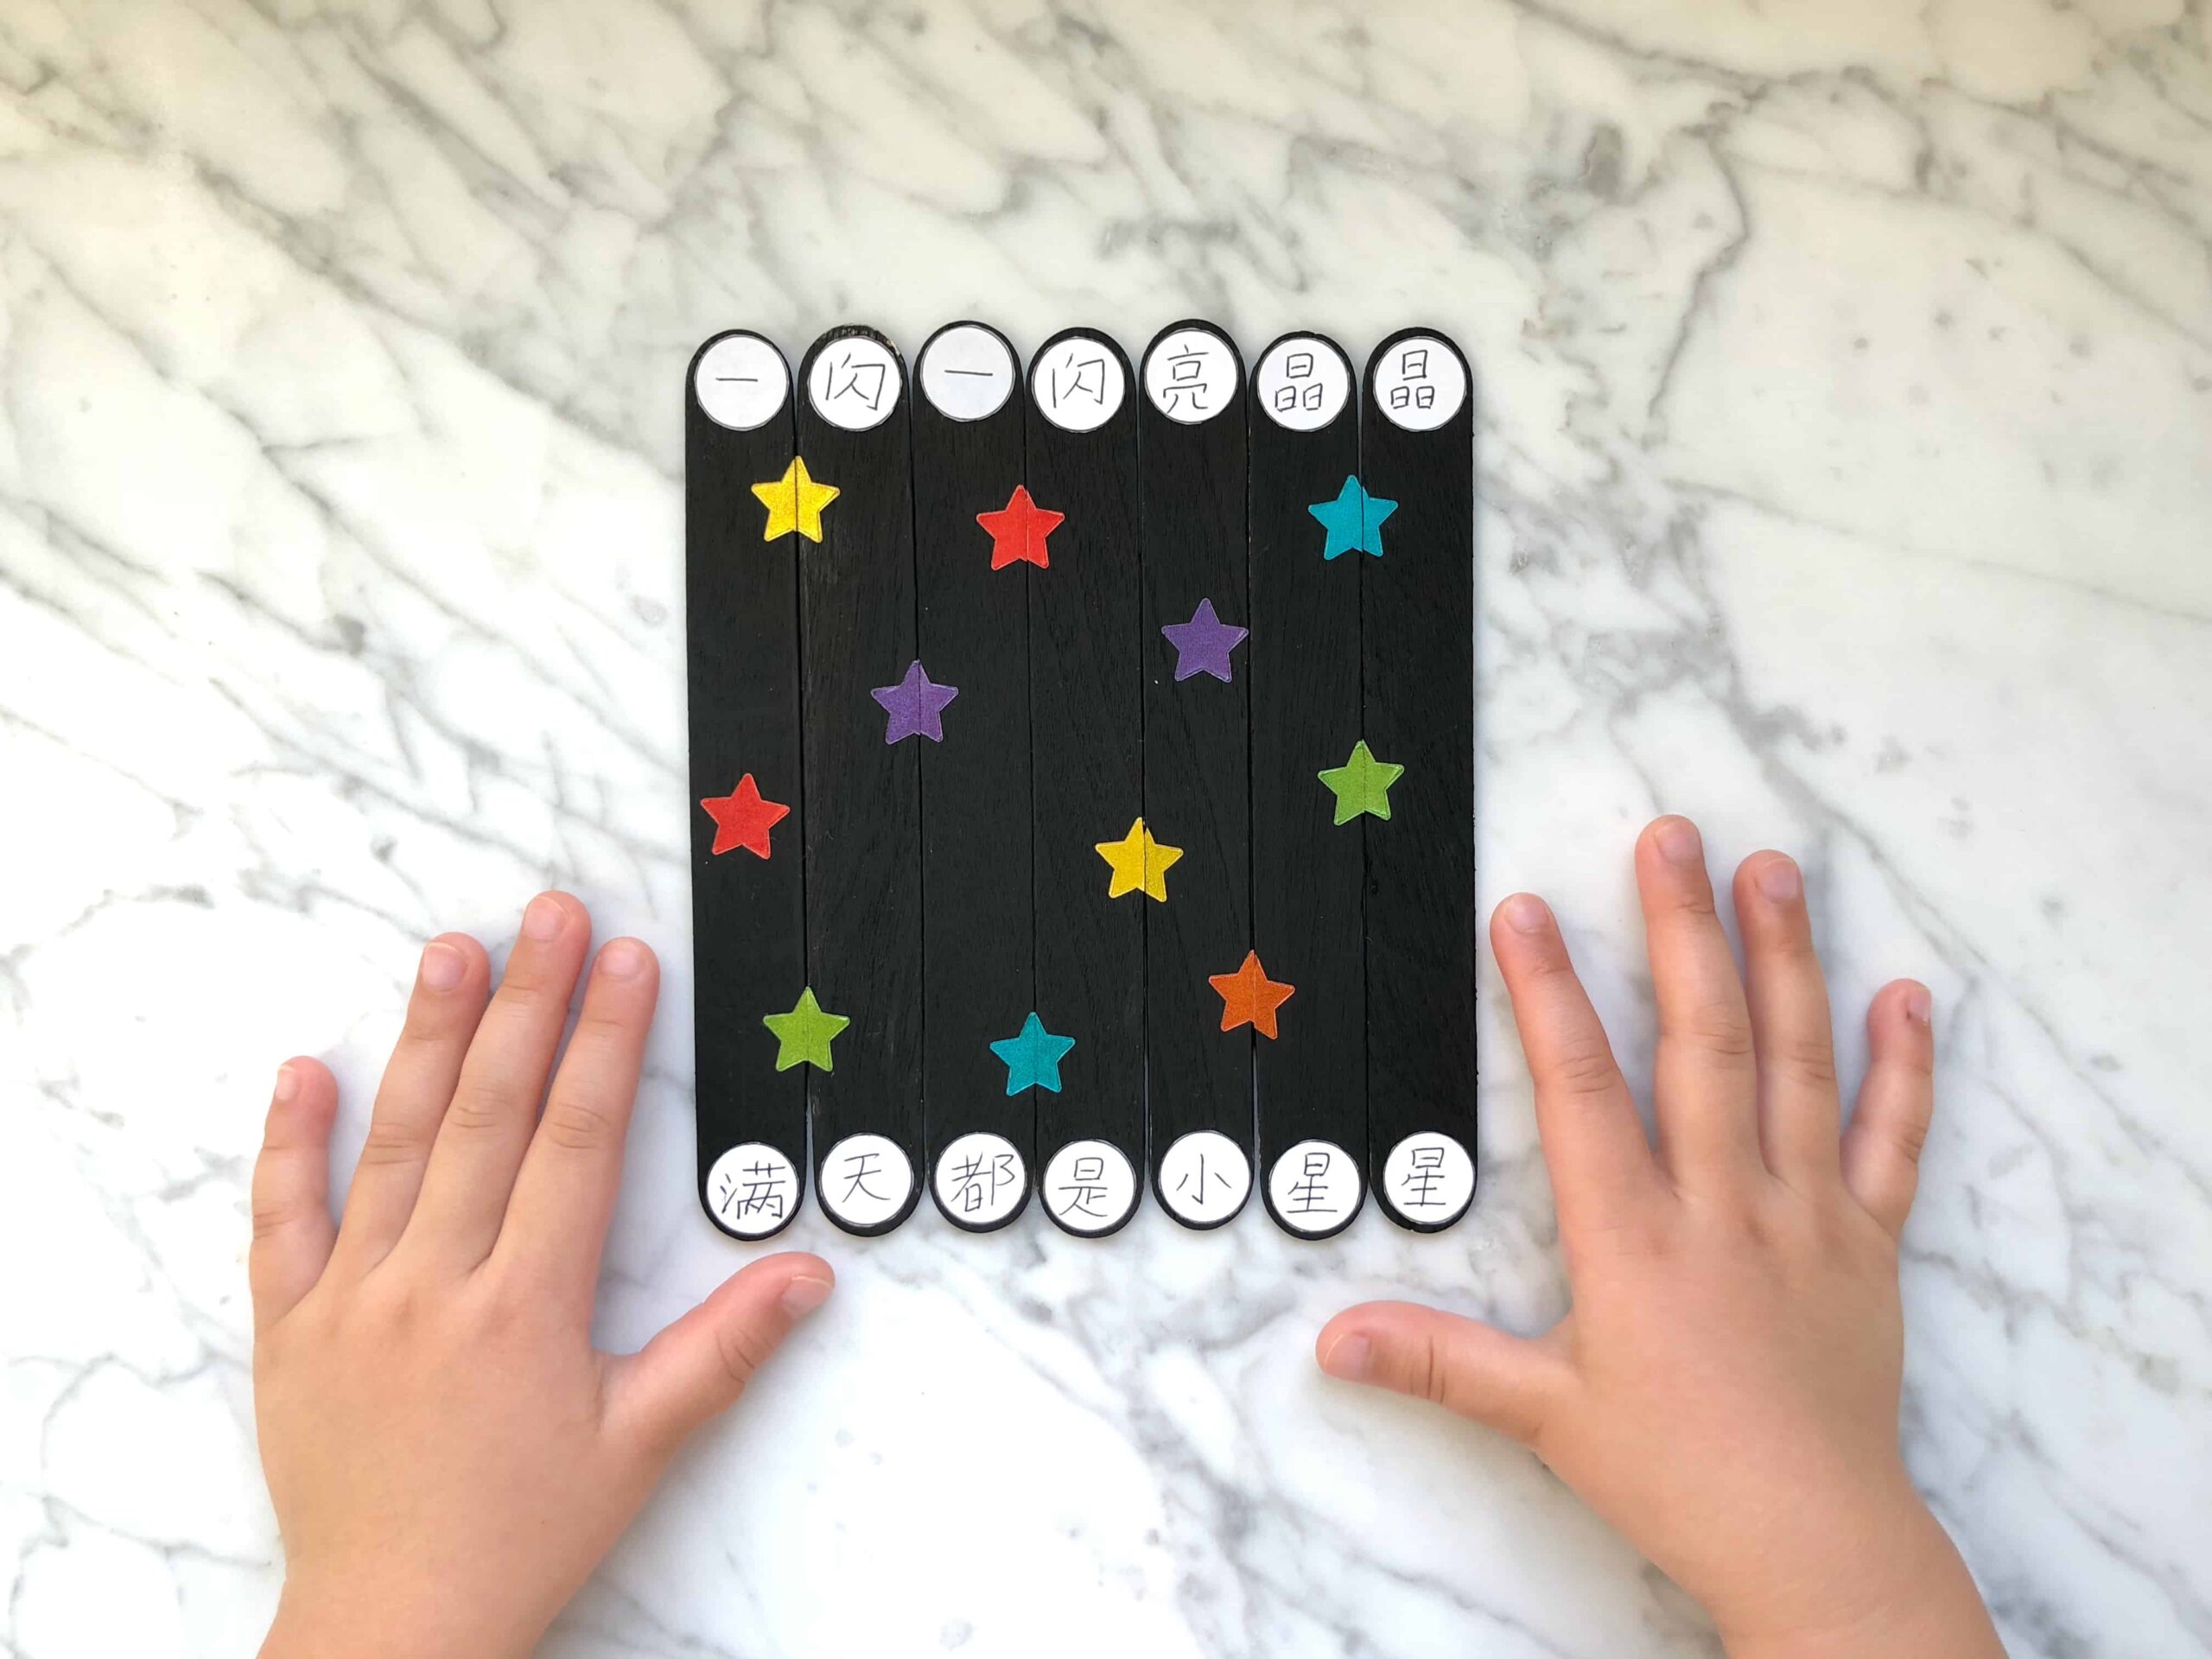 Twinkle Twinkle Little Star Craft Stick Puzzles and Lyrics in Chinese!